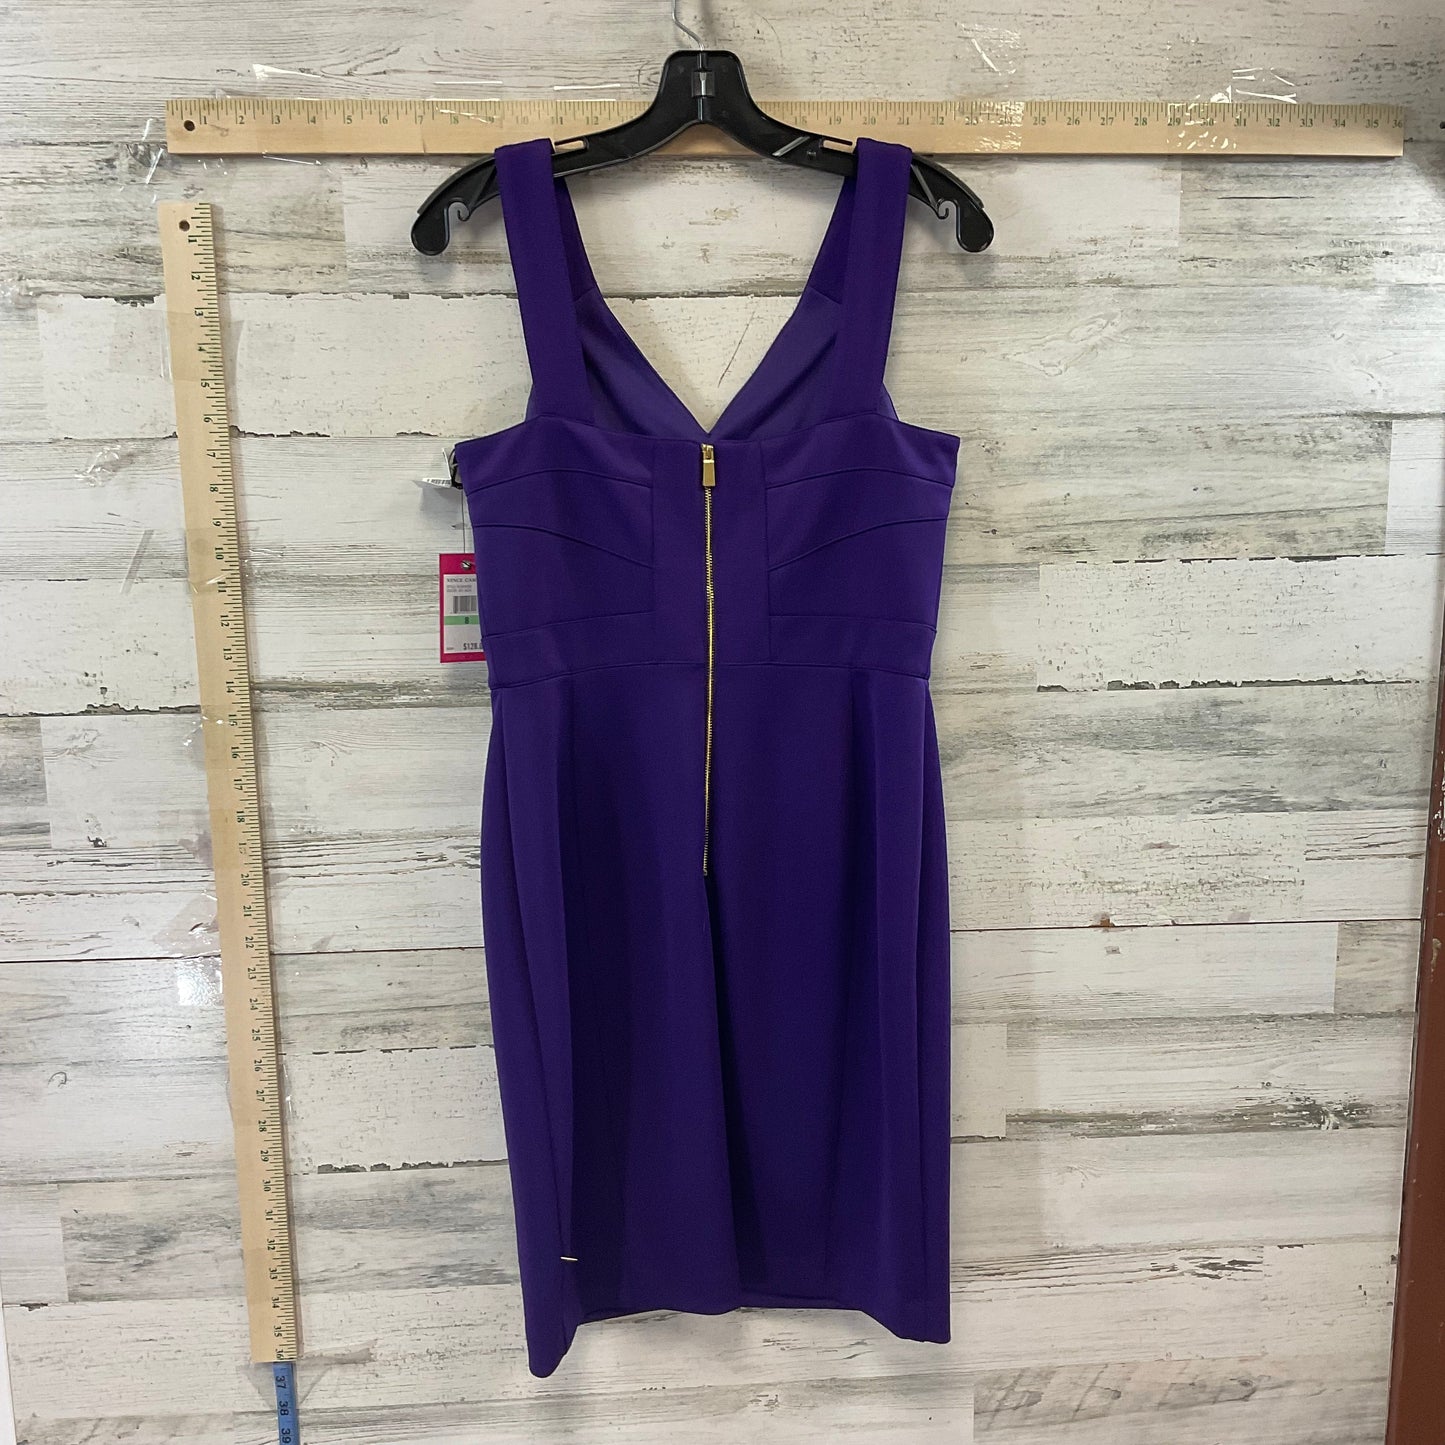 Dress Work By Vince Camuto  Size: M